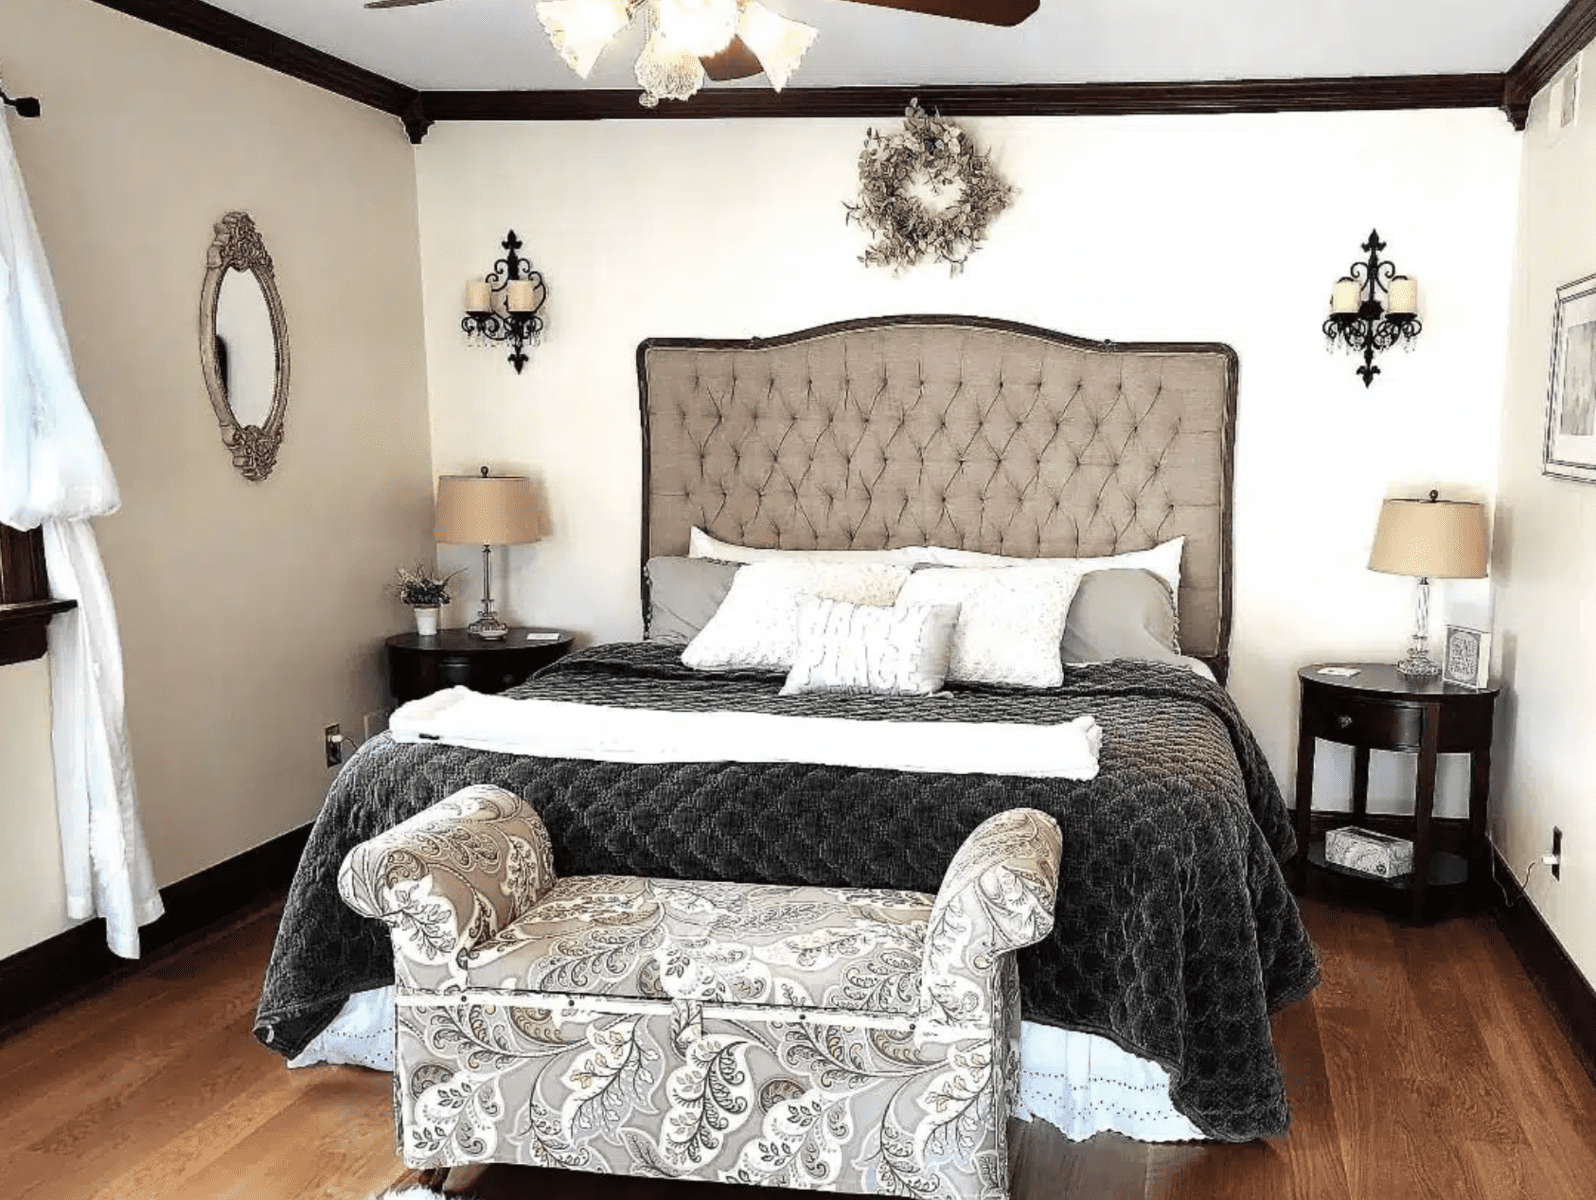 Large headboard with settee at the base of the bed at Maple Cove Bed and Breakfast